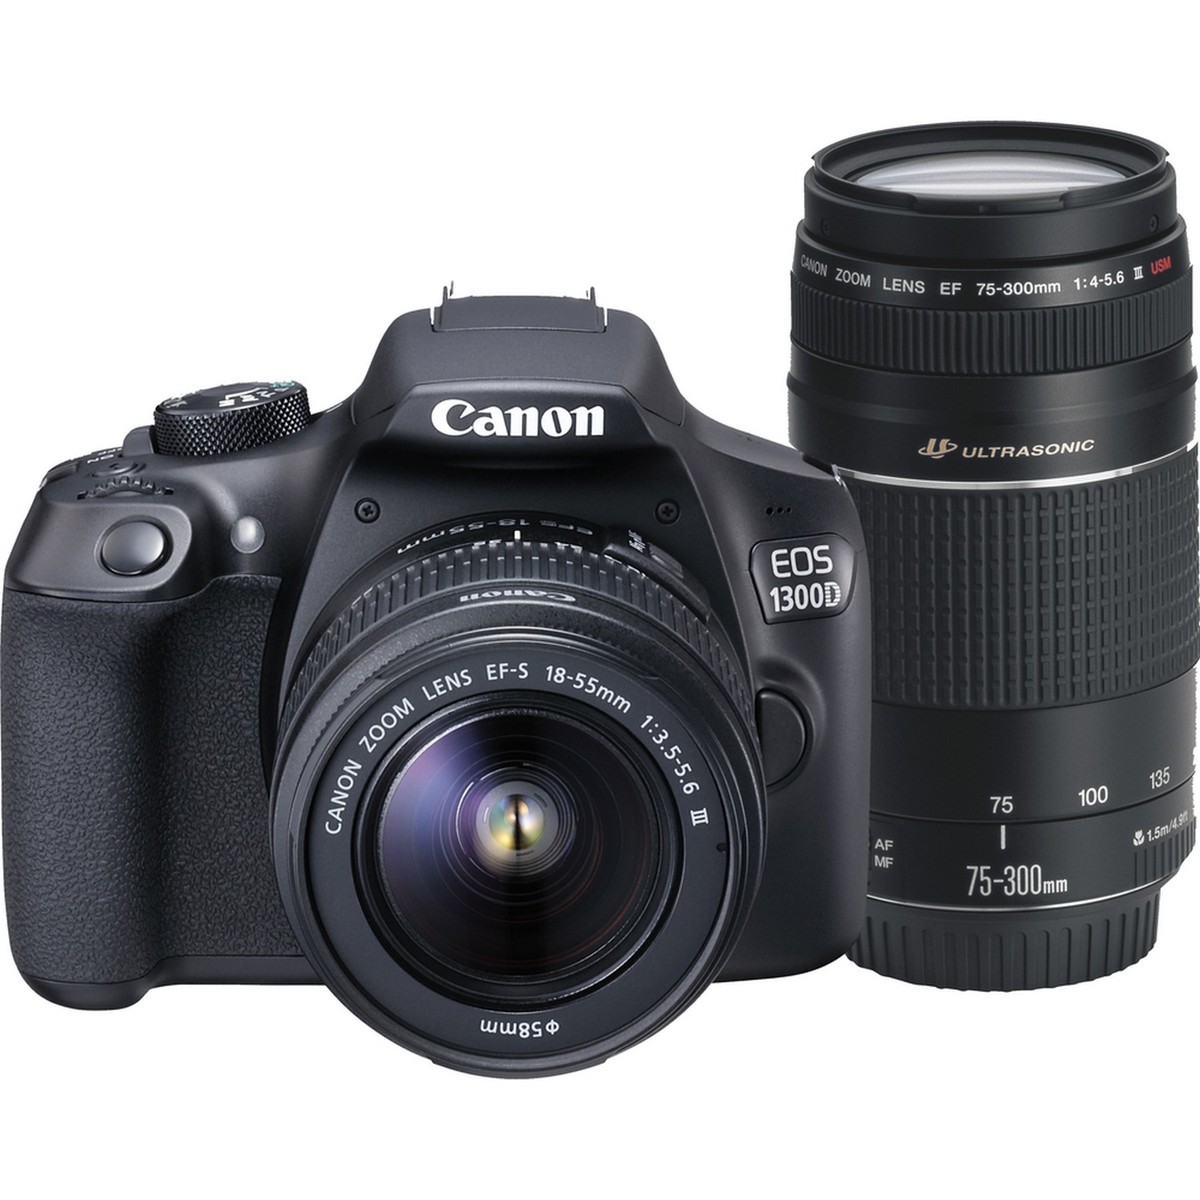 Canon DSLR Camera EOS1300D 18-55mm + 75-300mm Lens Online at Best Price ...